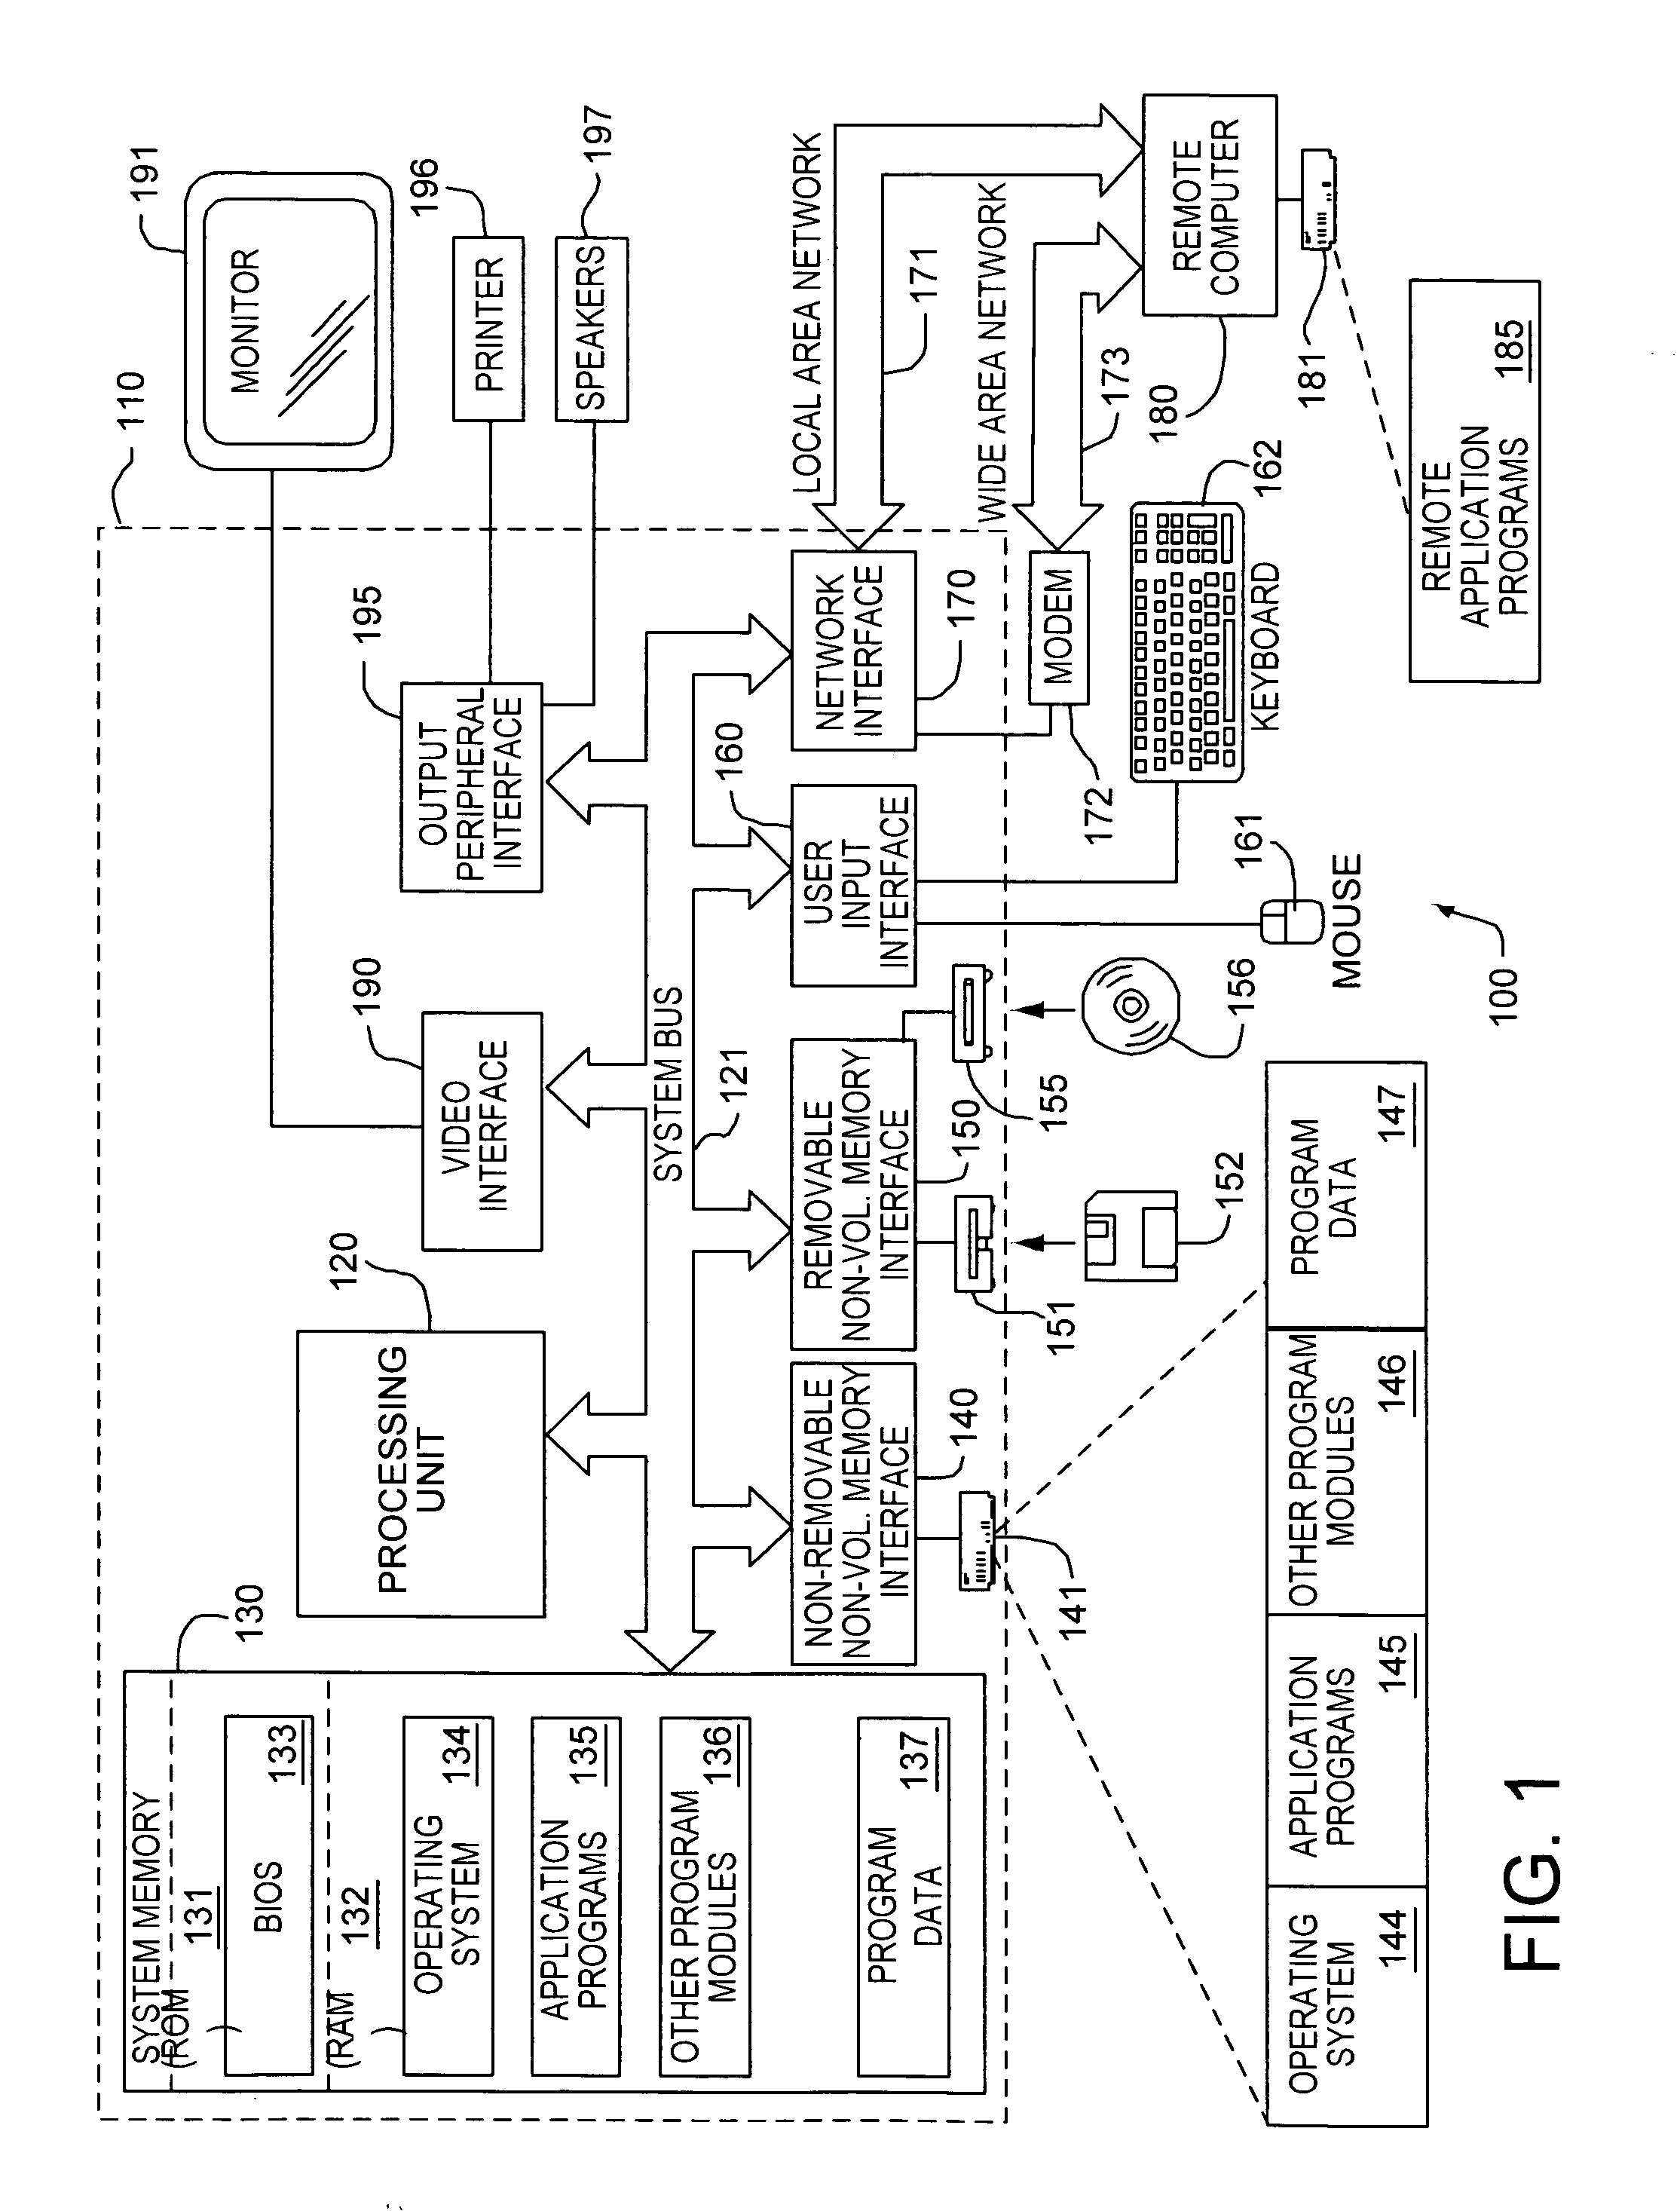 System and method for memory management